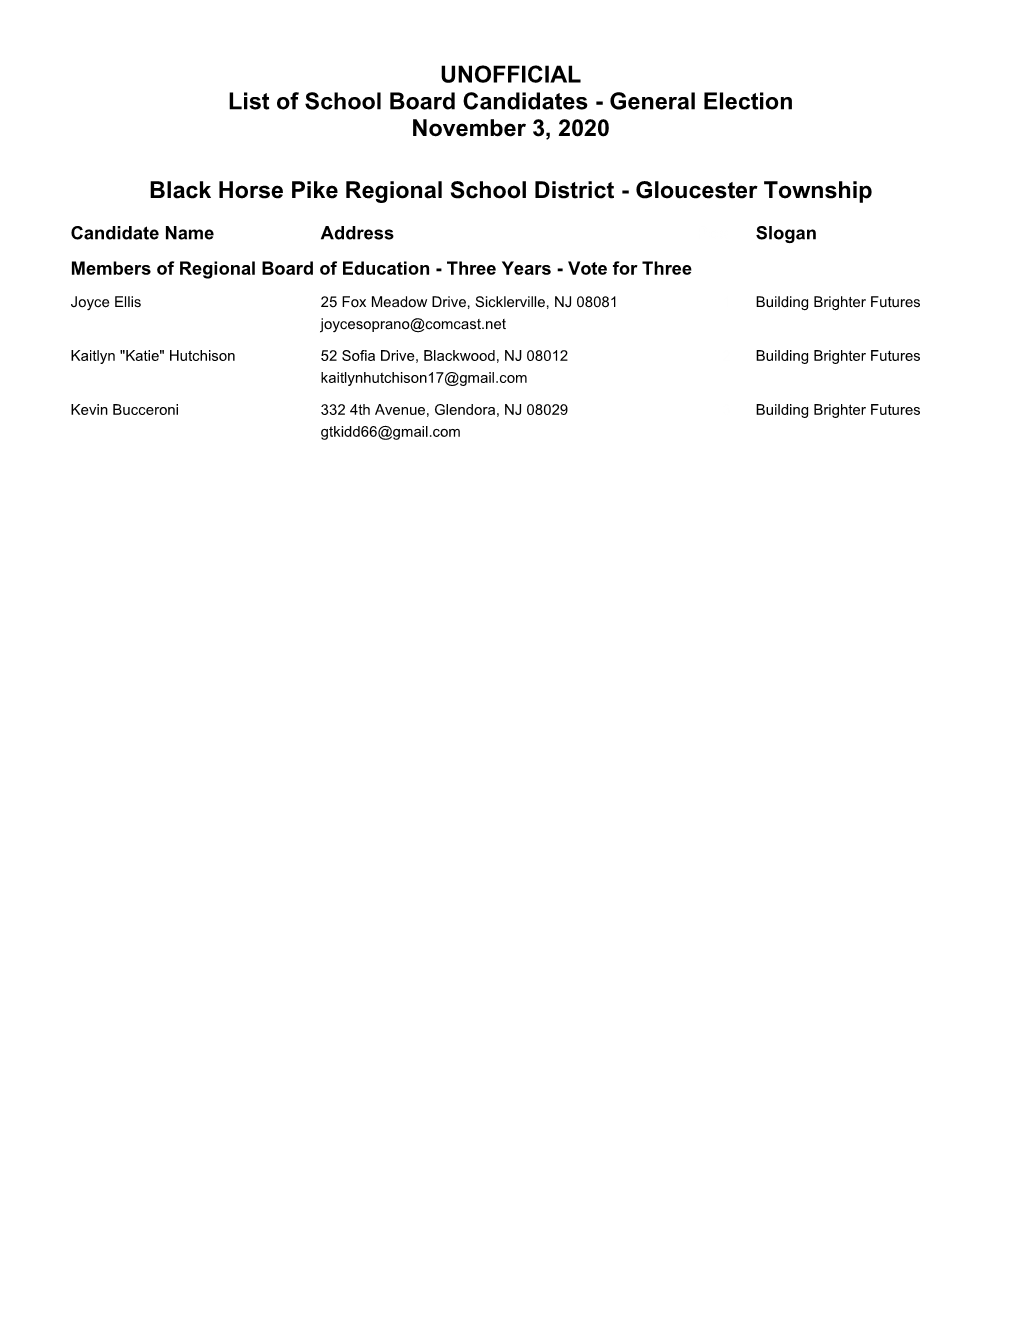 UNOFFICIAL List of School Board Candidates - General Election November 3, 2020